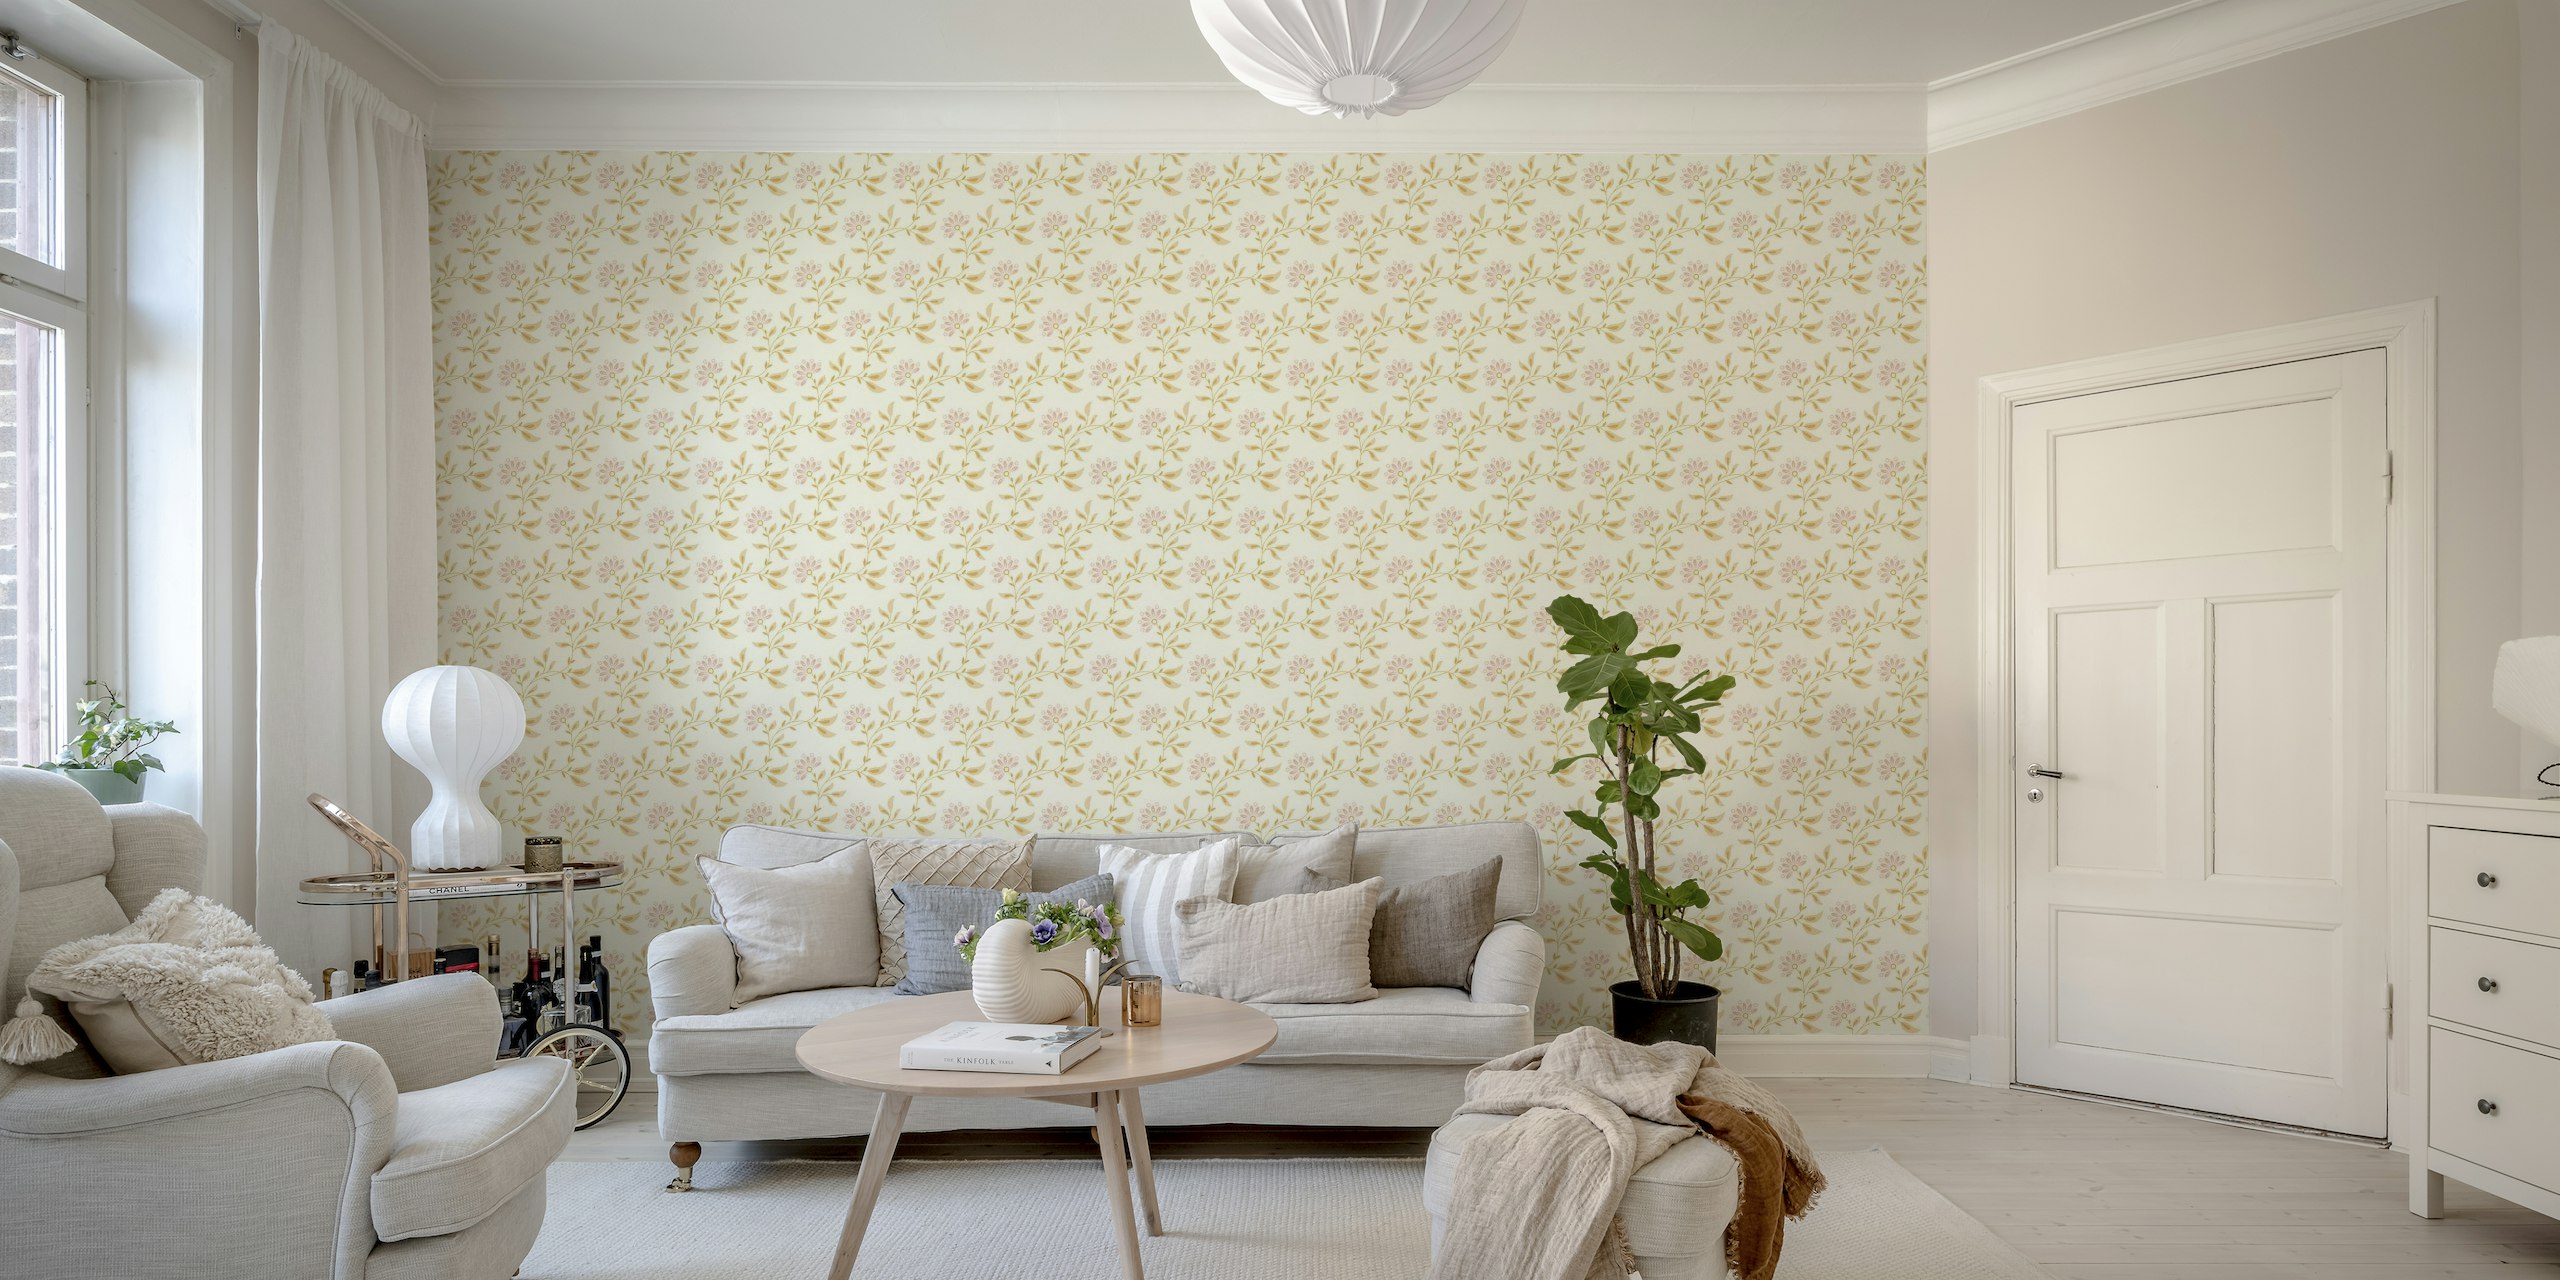 Trailing Floral, white, S wallpaper